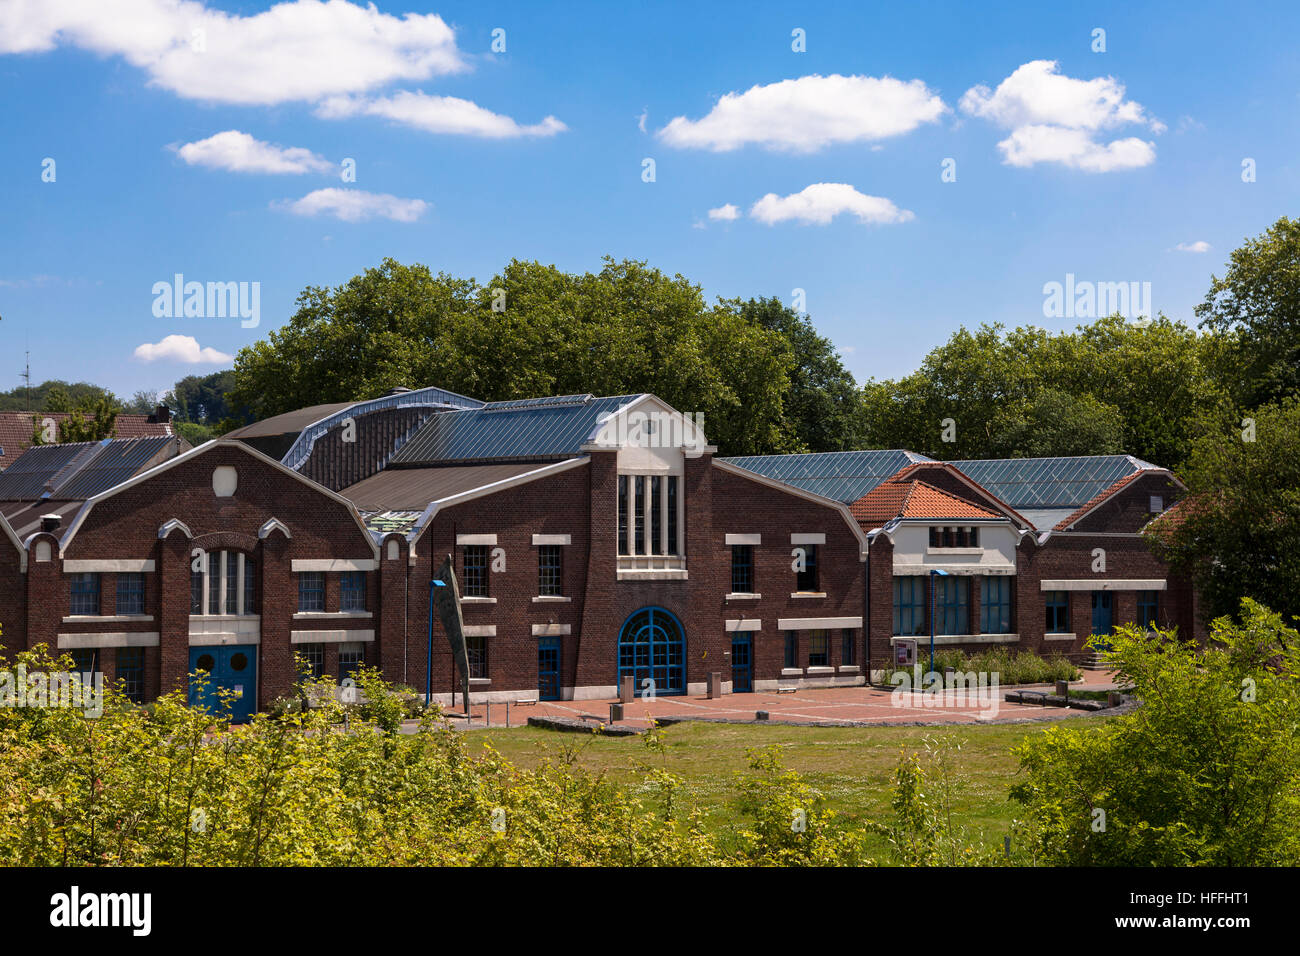 Germany, Herne, cultural and event center Flottmann Halls, the halls were built in 1908 as a manufacturing plant Stock Photo